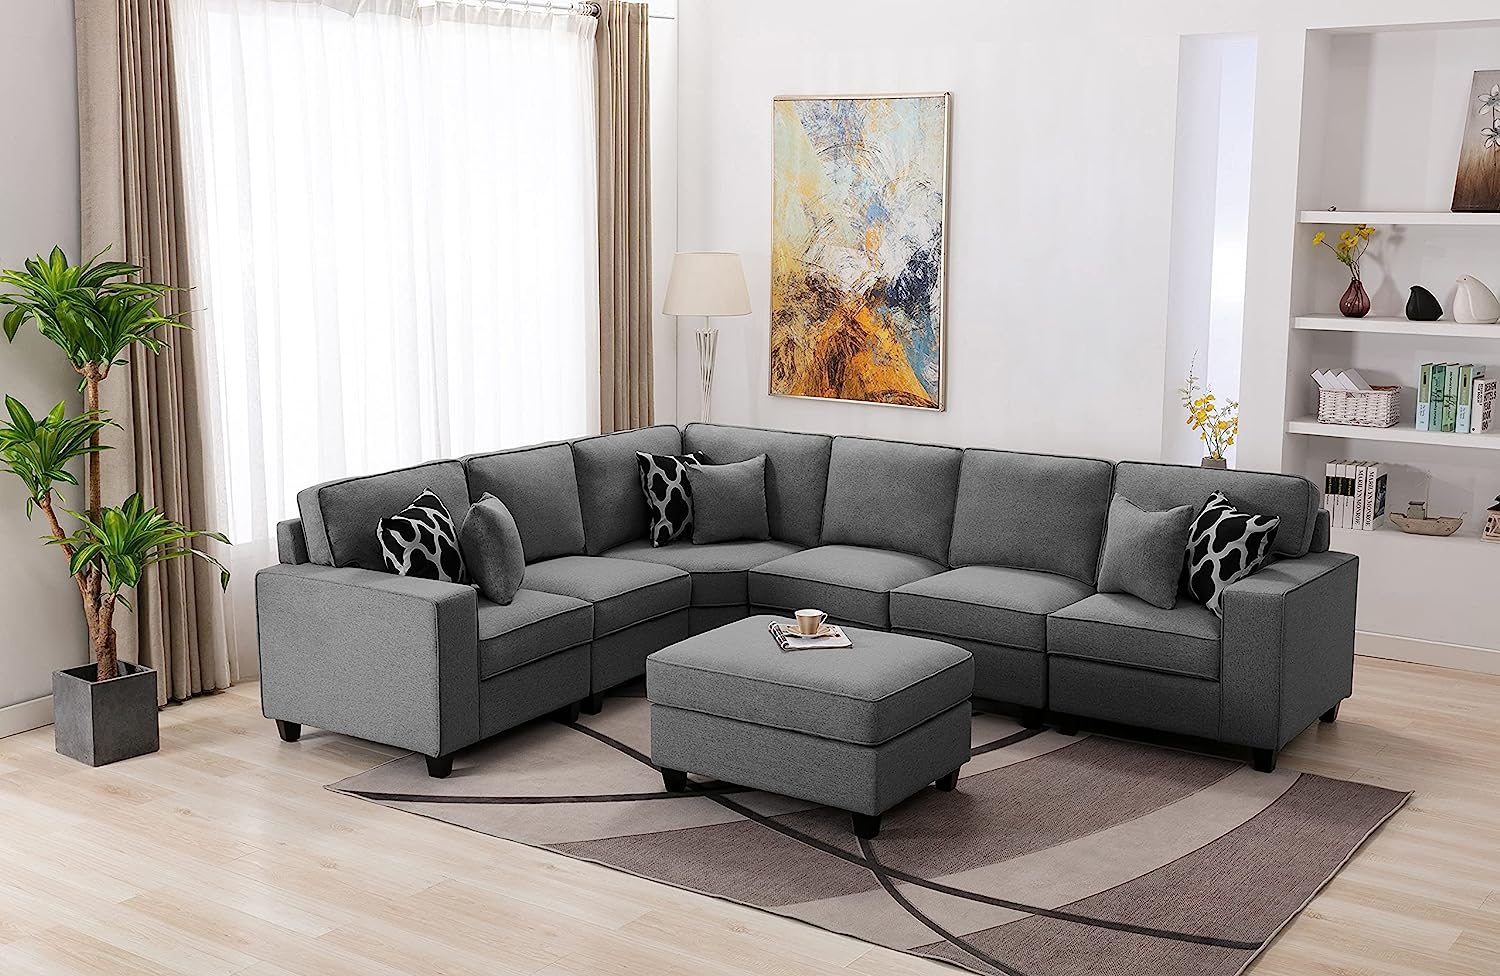 Legend Furniture Symmetrical Modular Seating with Ottoman Sofas Sectional, 124"-$2390